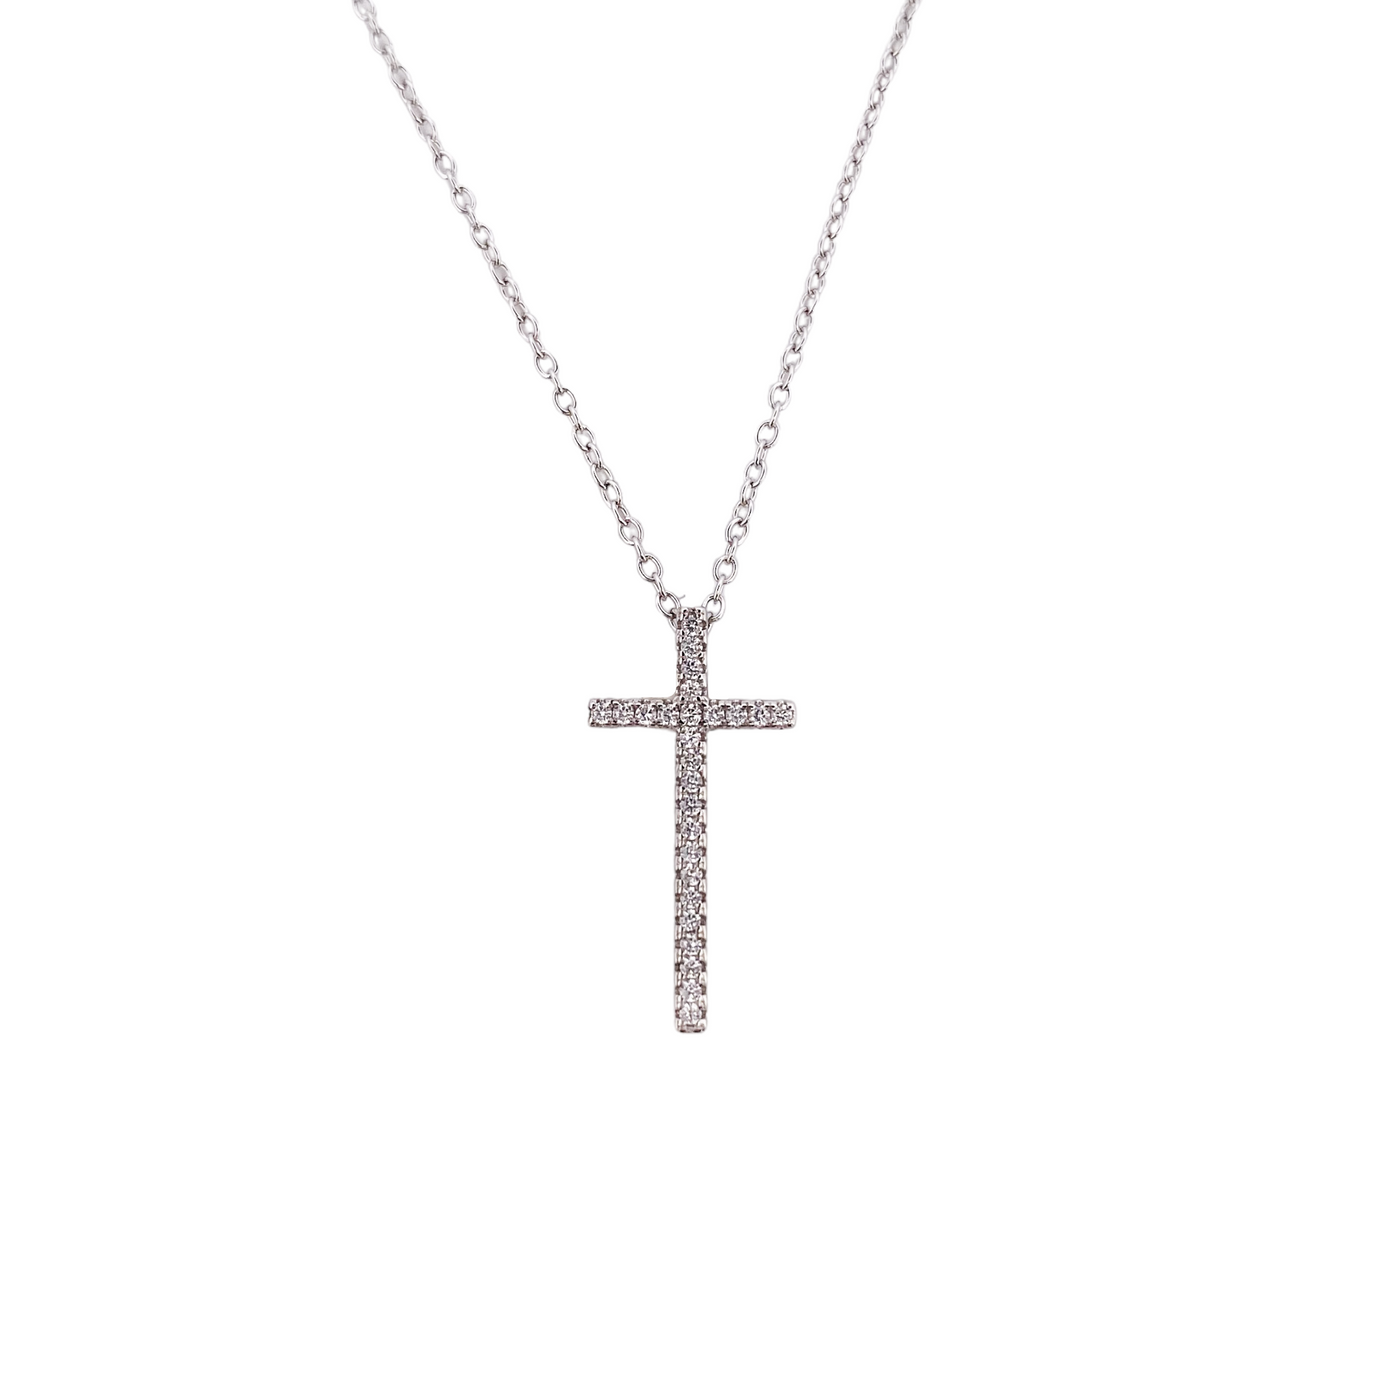 SILVER NECKLACE WITH CROSS CZ